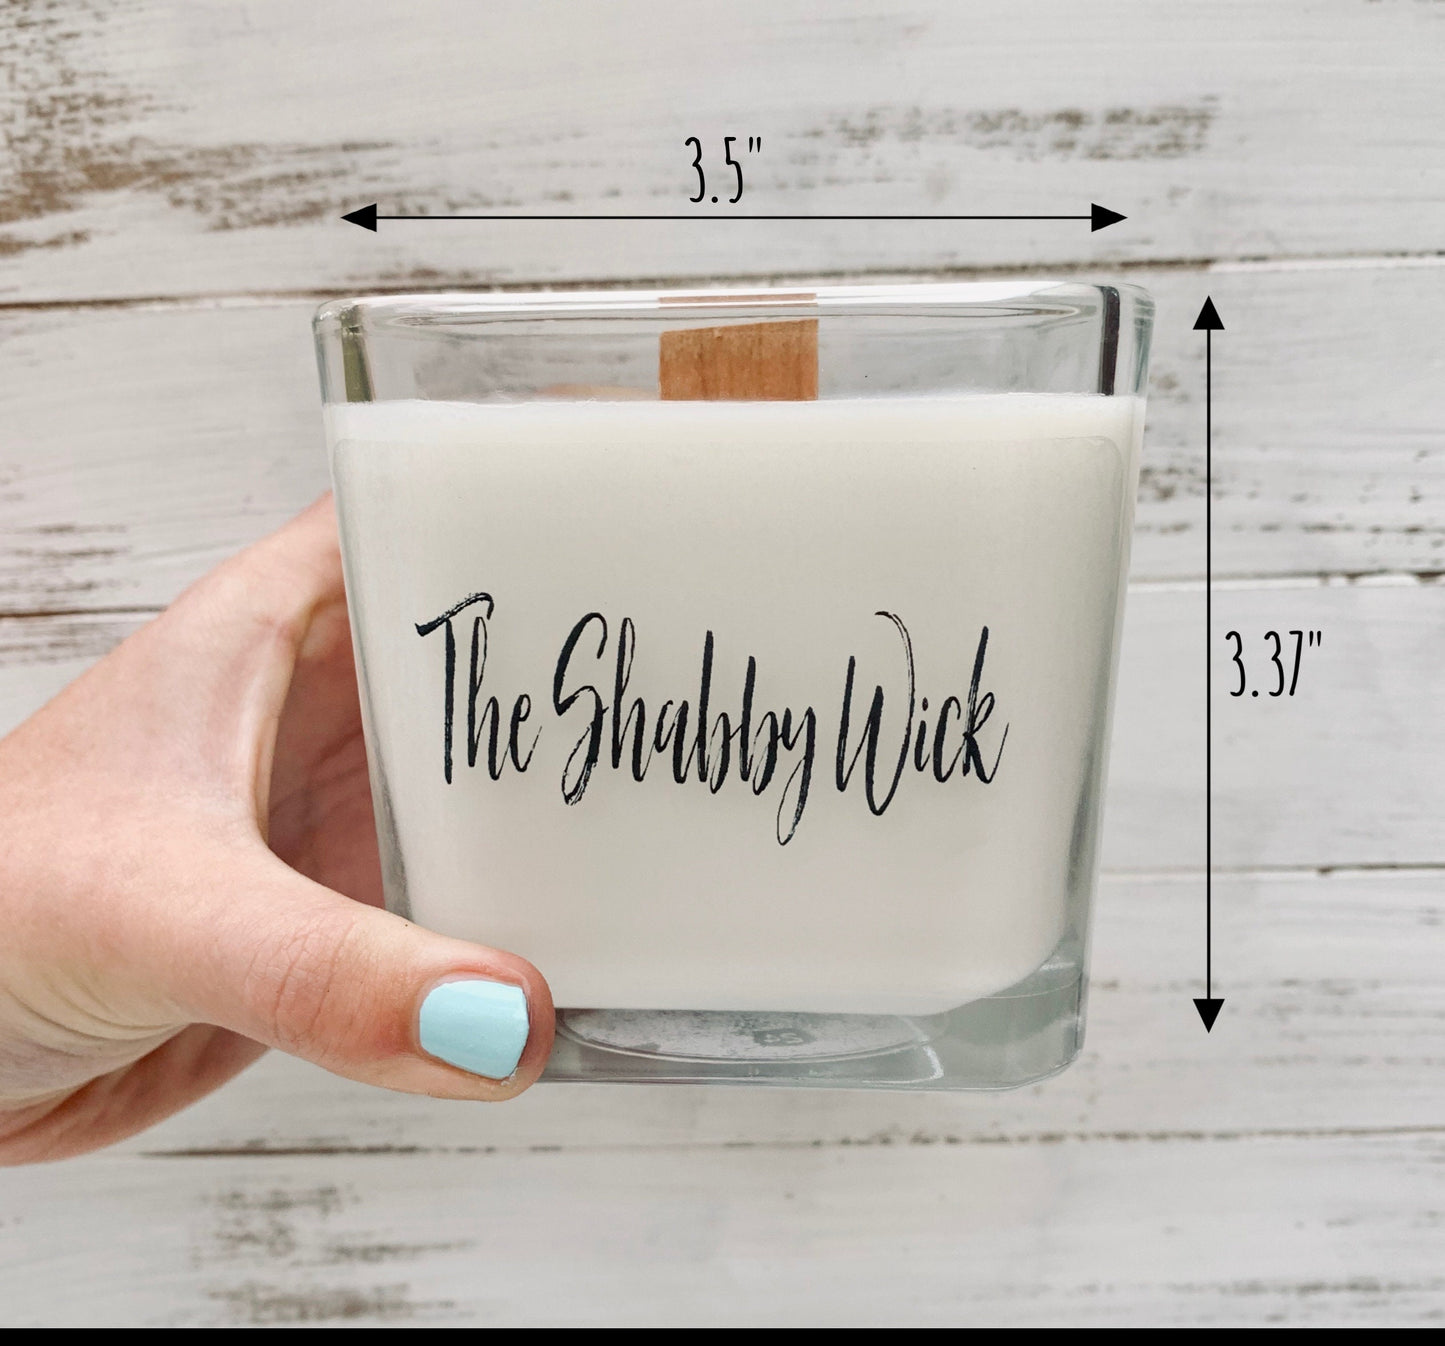 There's No Place like Home Candle, Personalized Scented Soy Candle for New Home Gift, Home Owner Gif - TheShabbyWick